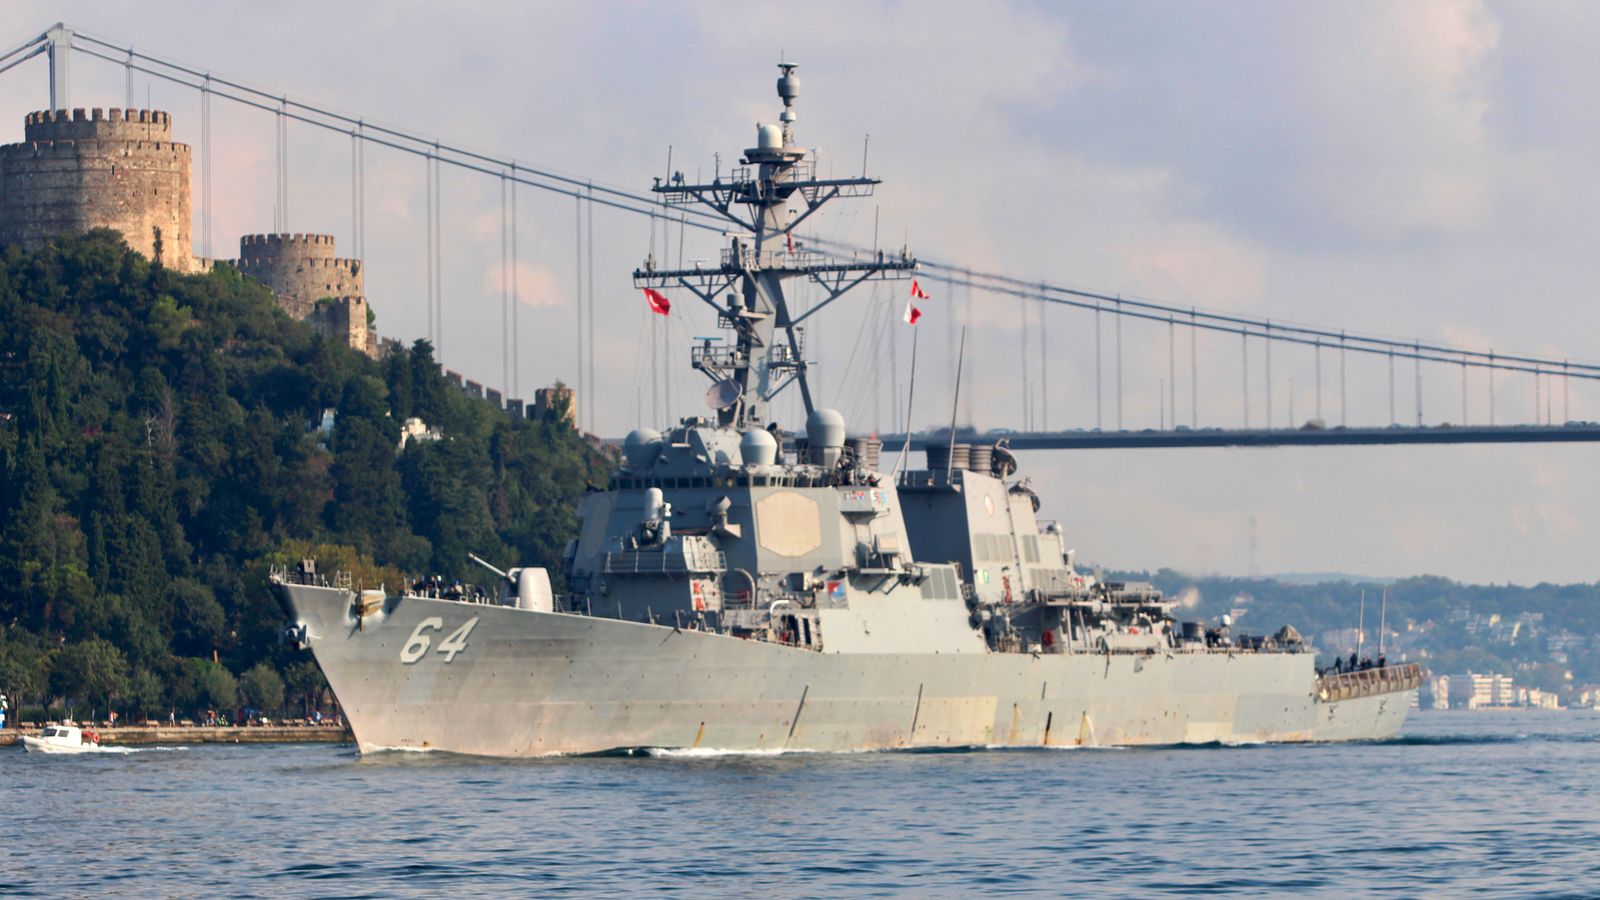 Three commercial ships attacked by missiles in Red Sea - as USS Carney shoots down armed drones